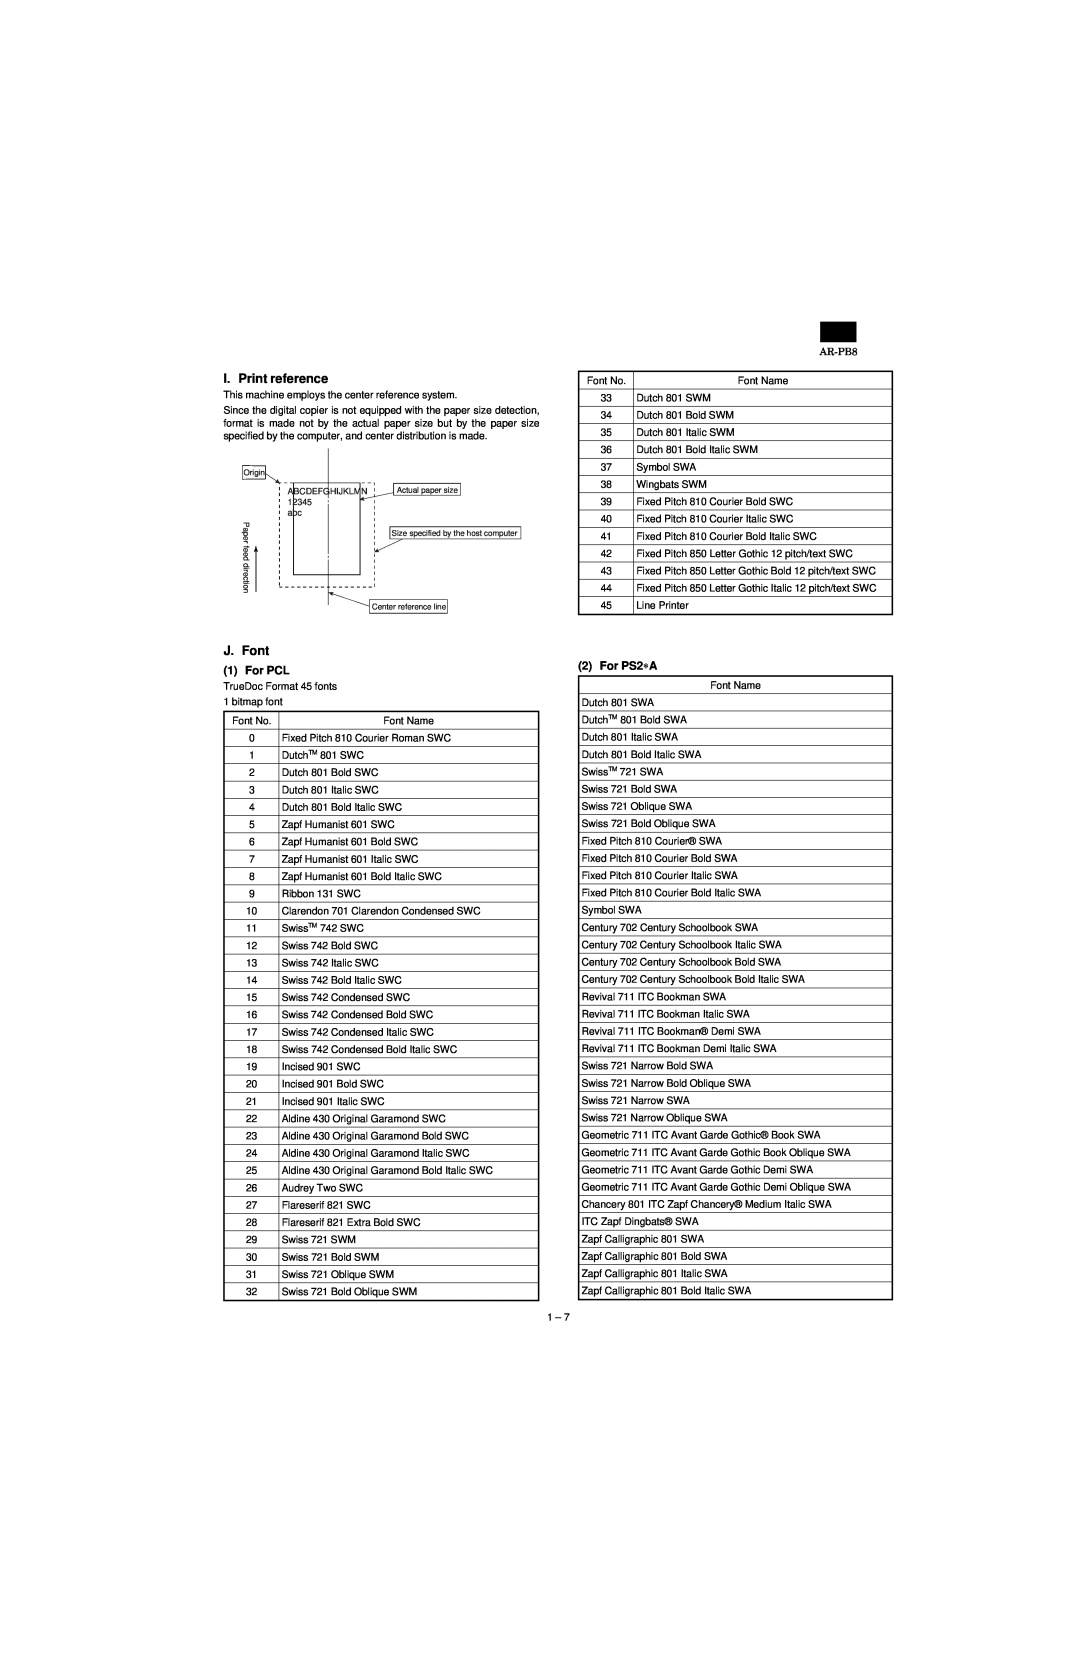 Sharp AR-PB8 specifications I. Print reference, J. Font, For PCL, For PS2∗A 